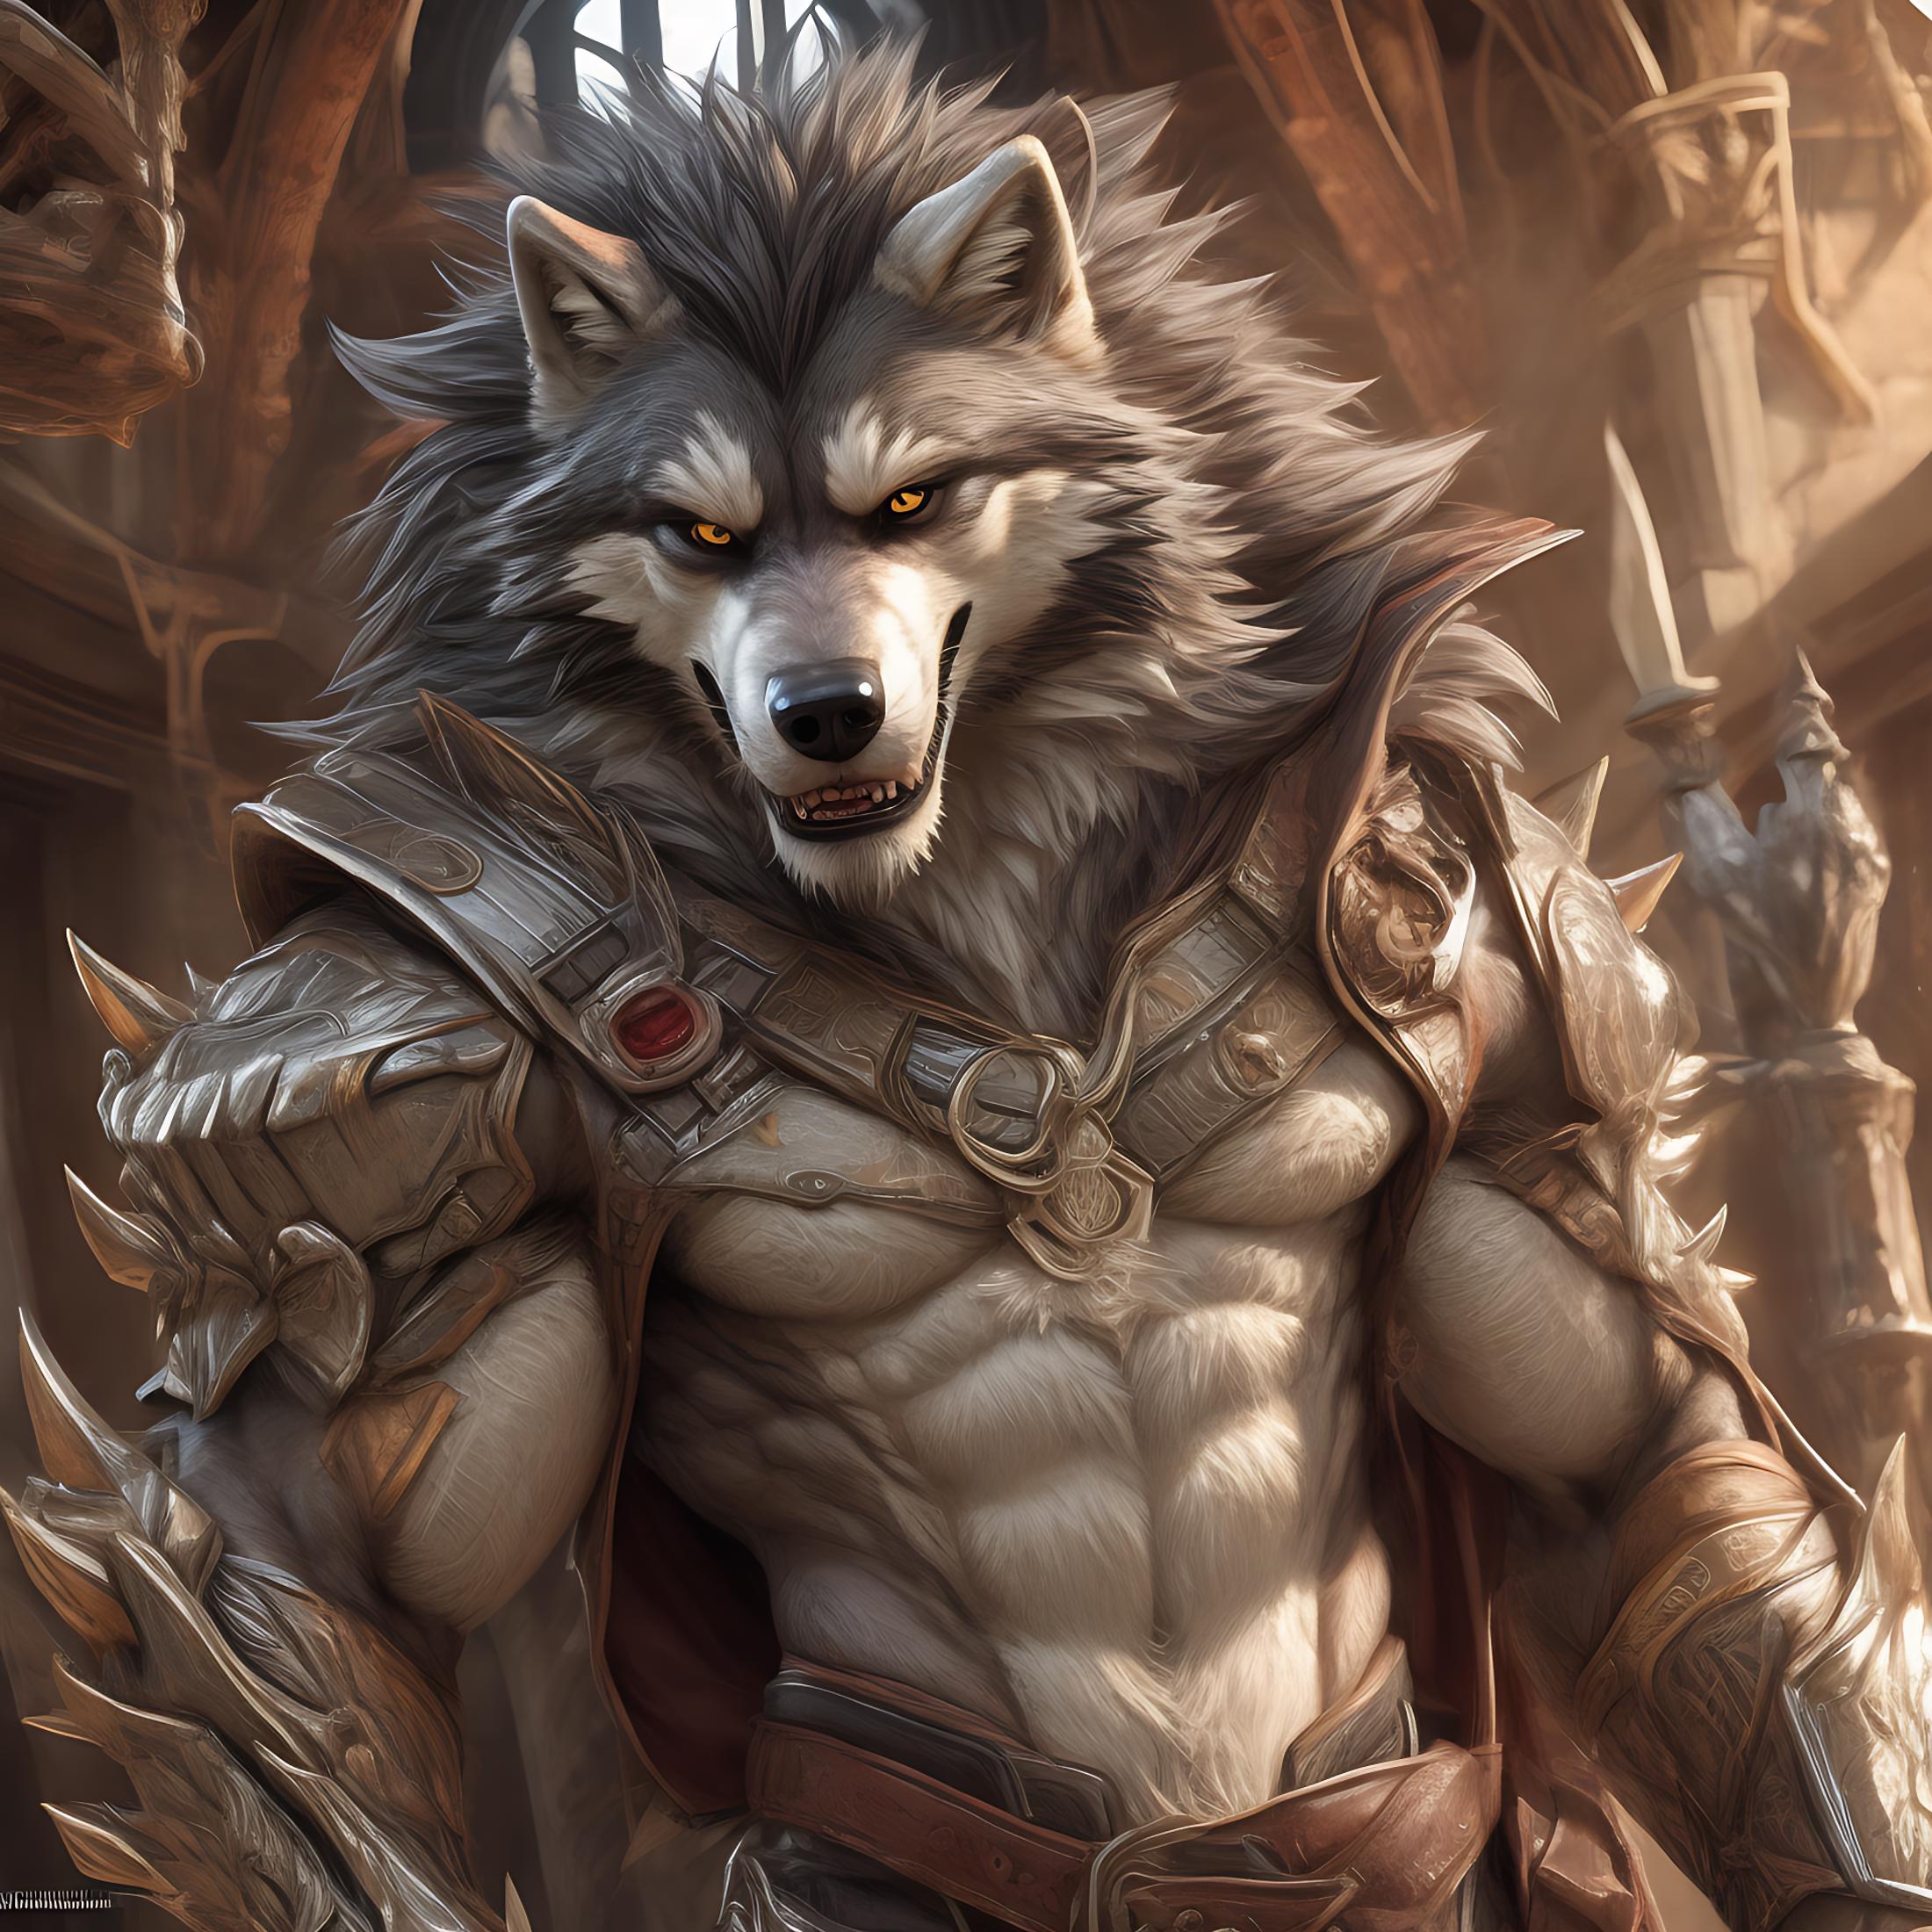 Wolfthorn (old spice) image by FoxMccloud2022